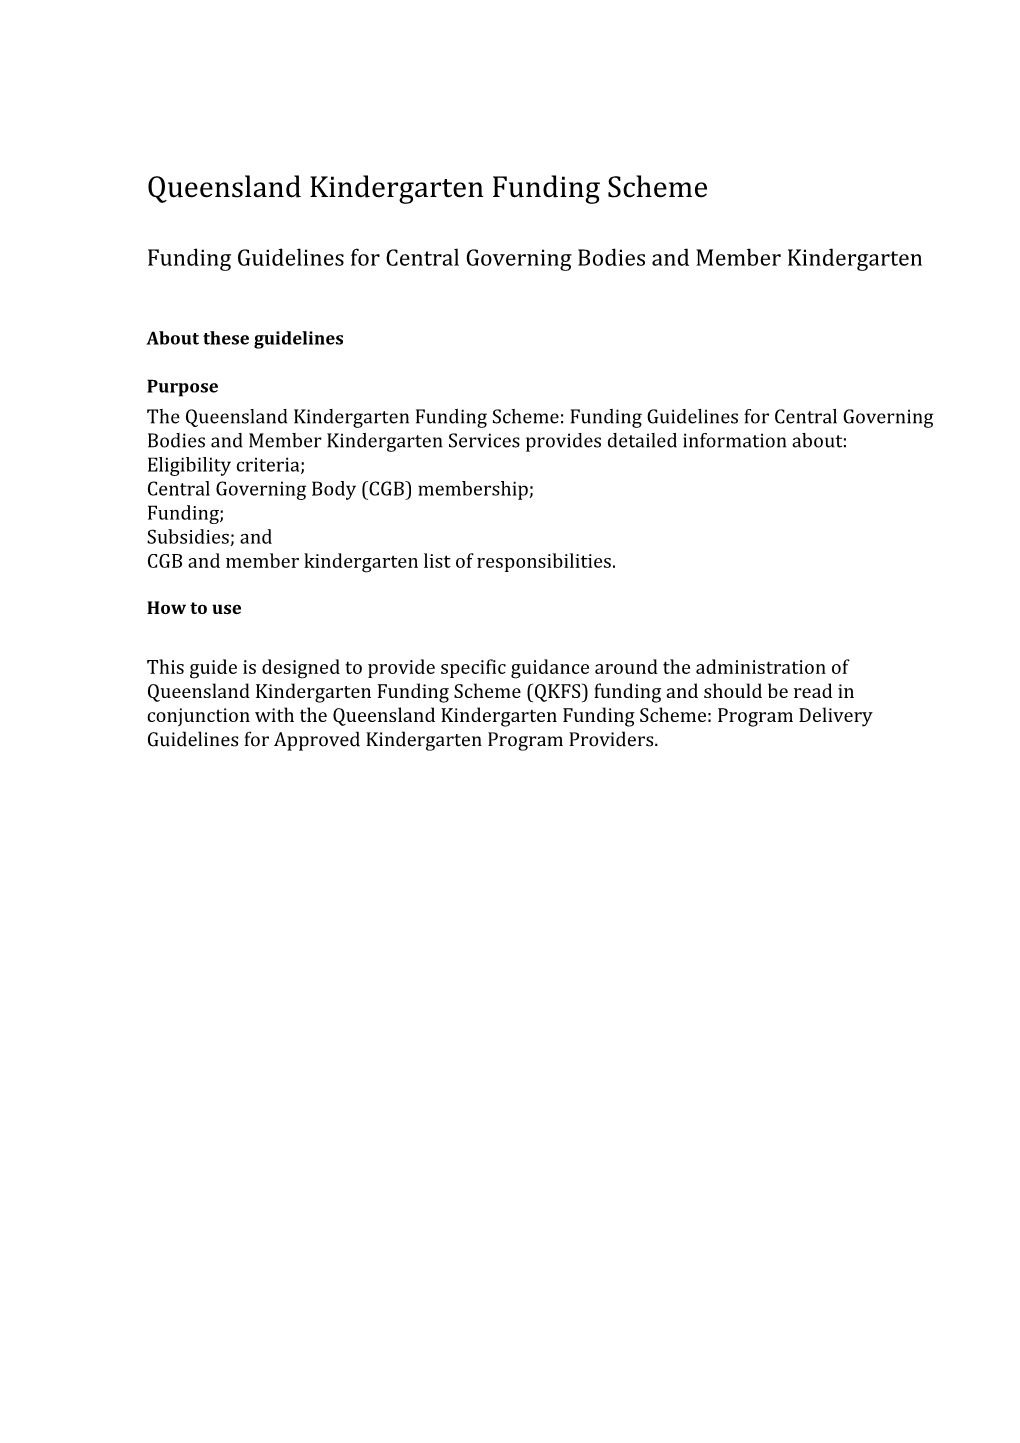 QKFS - Funding Guidelines for Central Governing Bodies and Member Kindergarten